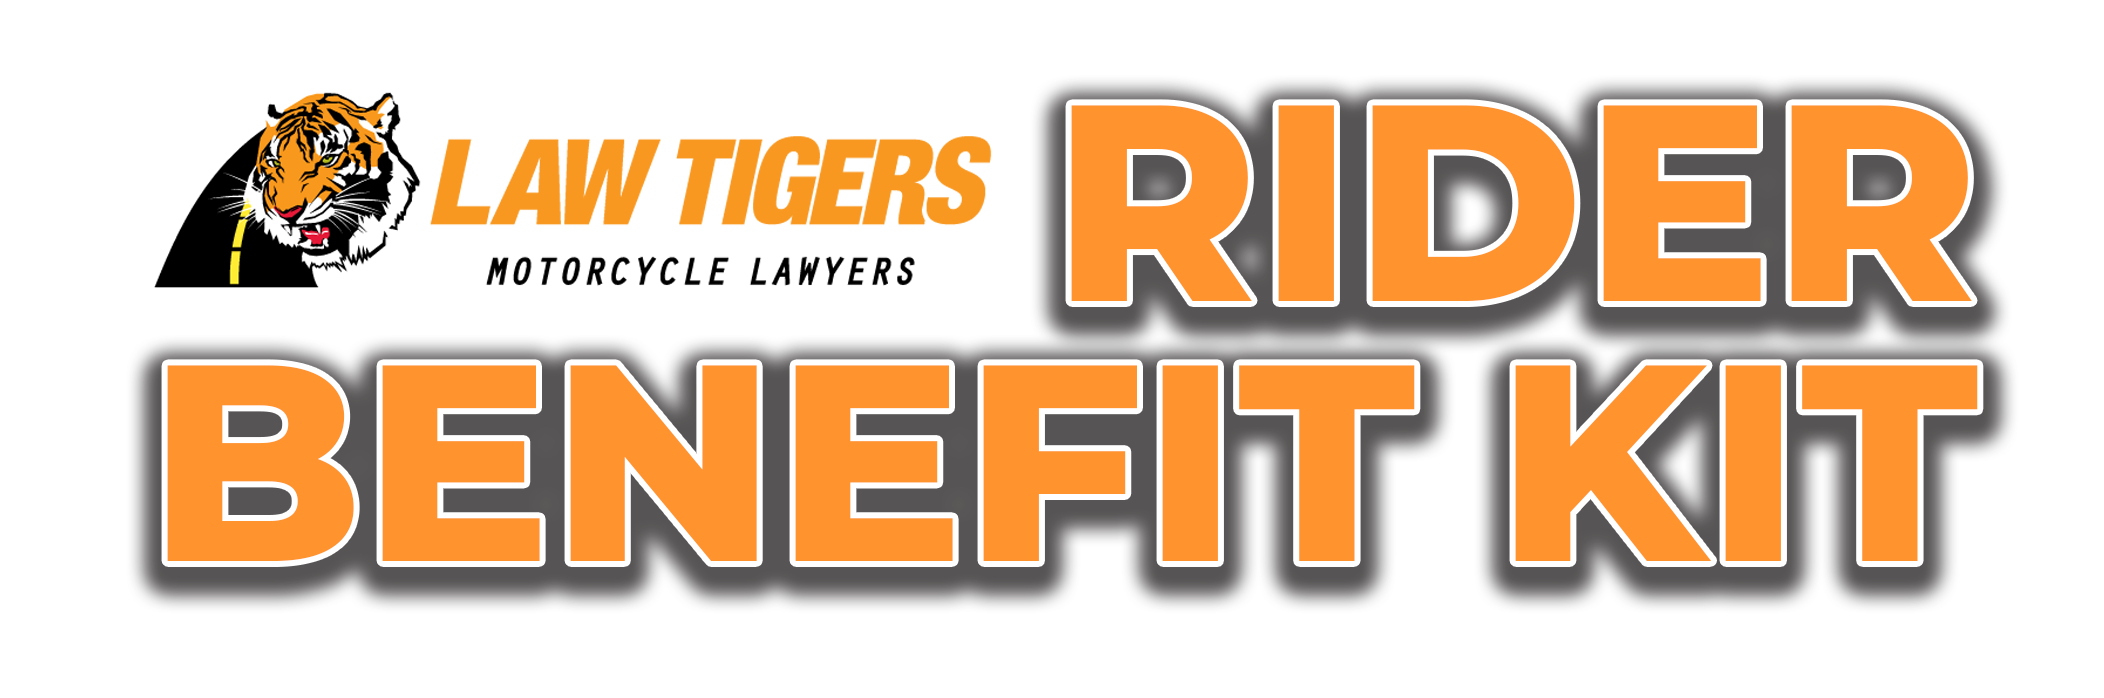 Law Tigers Free Motorcycle Benefit kit with Document folder LT_RiderBenefit_Header_Title-1.png?width=2104&height=698&name=LT_RiderBenefit_Header_Title-1